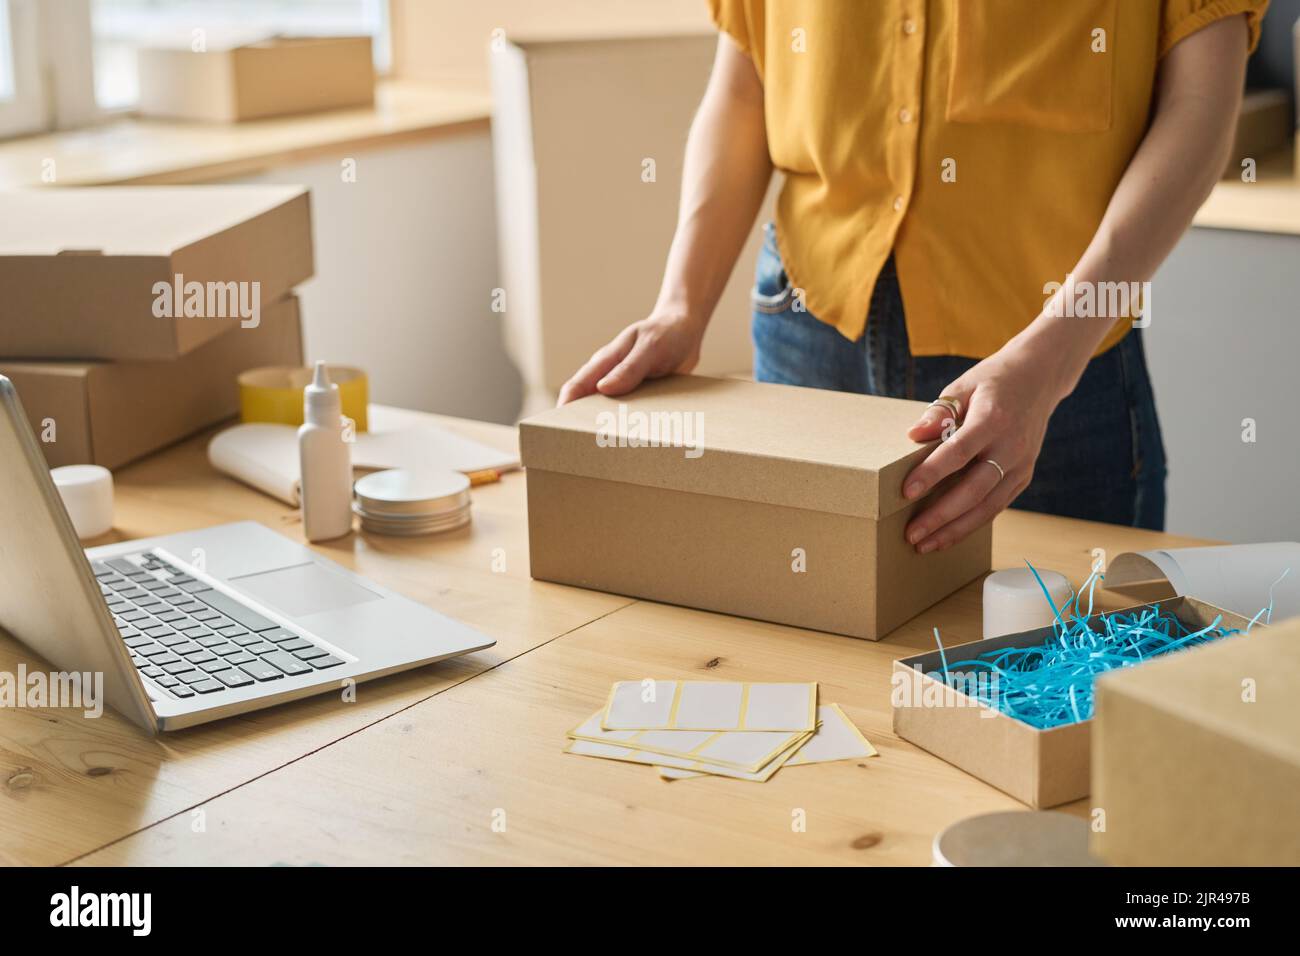 Close-up of warehouse worker packing online orders in cardboard boxes at table before shipping Stock Photo